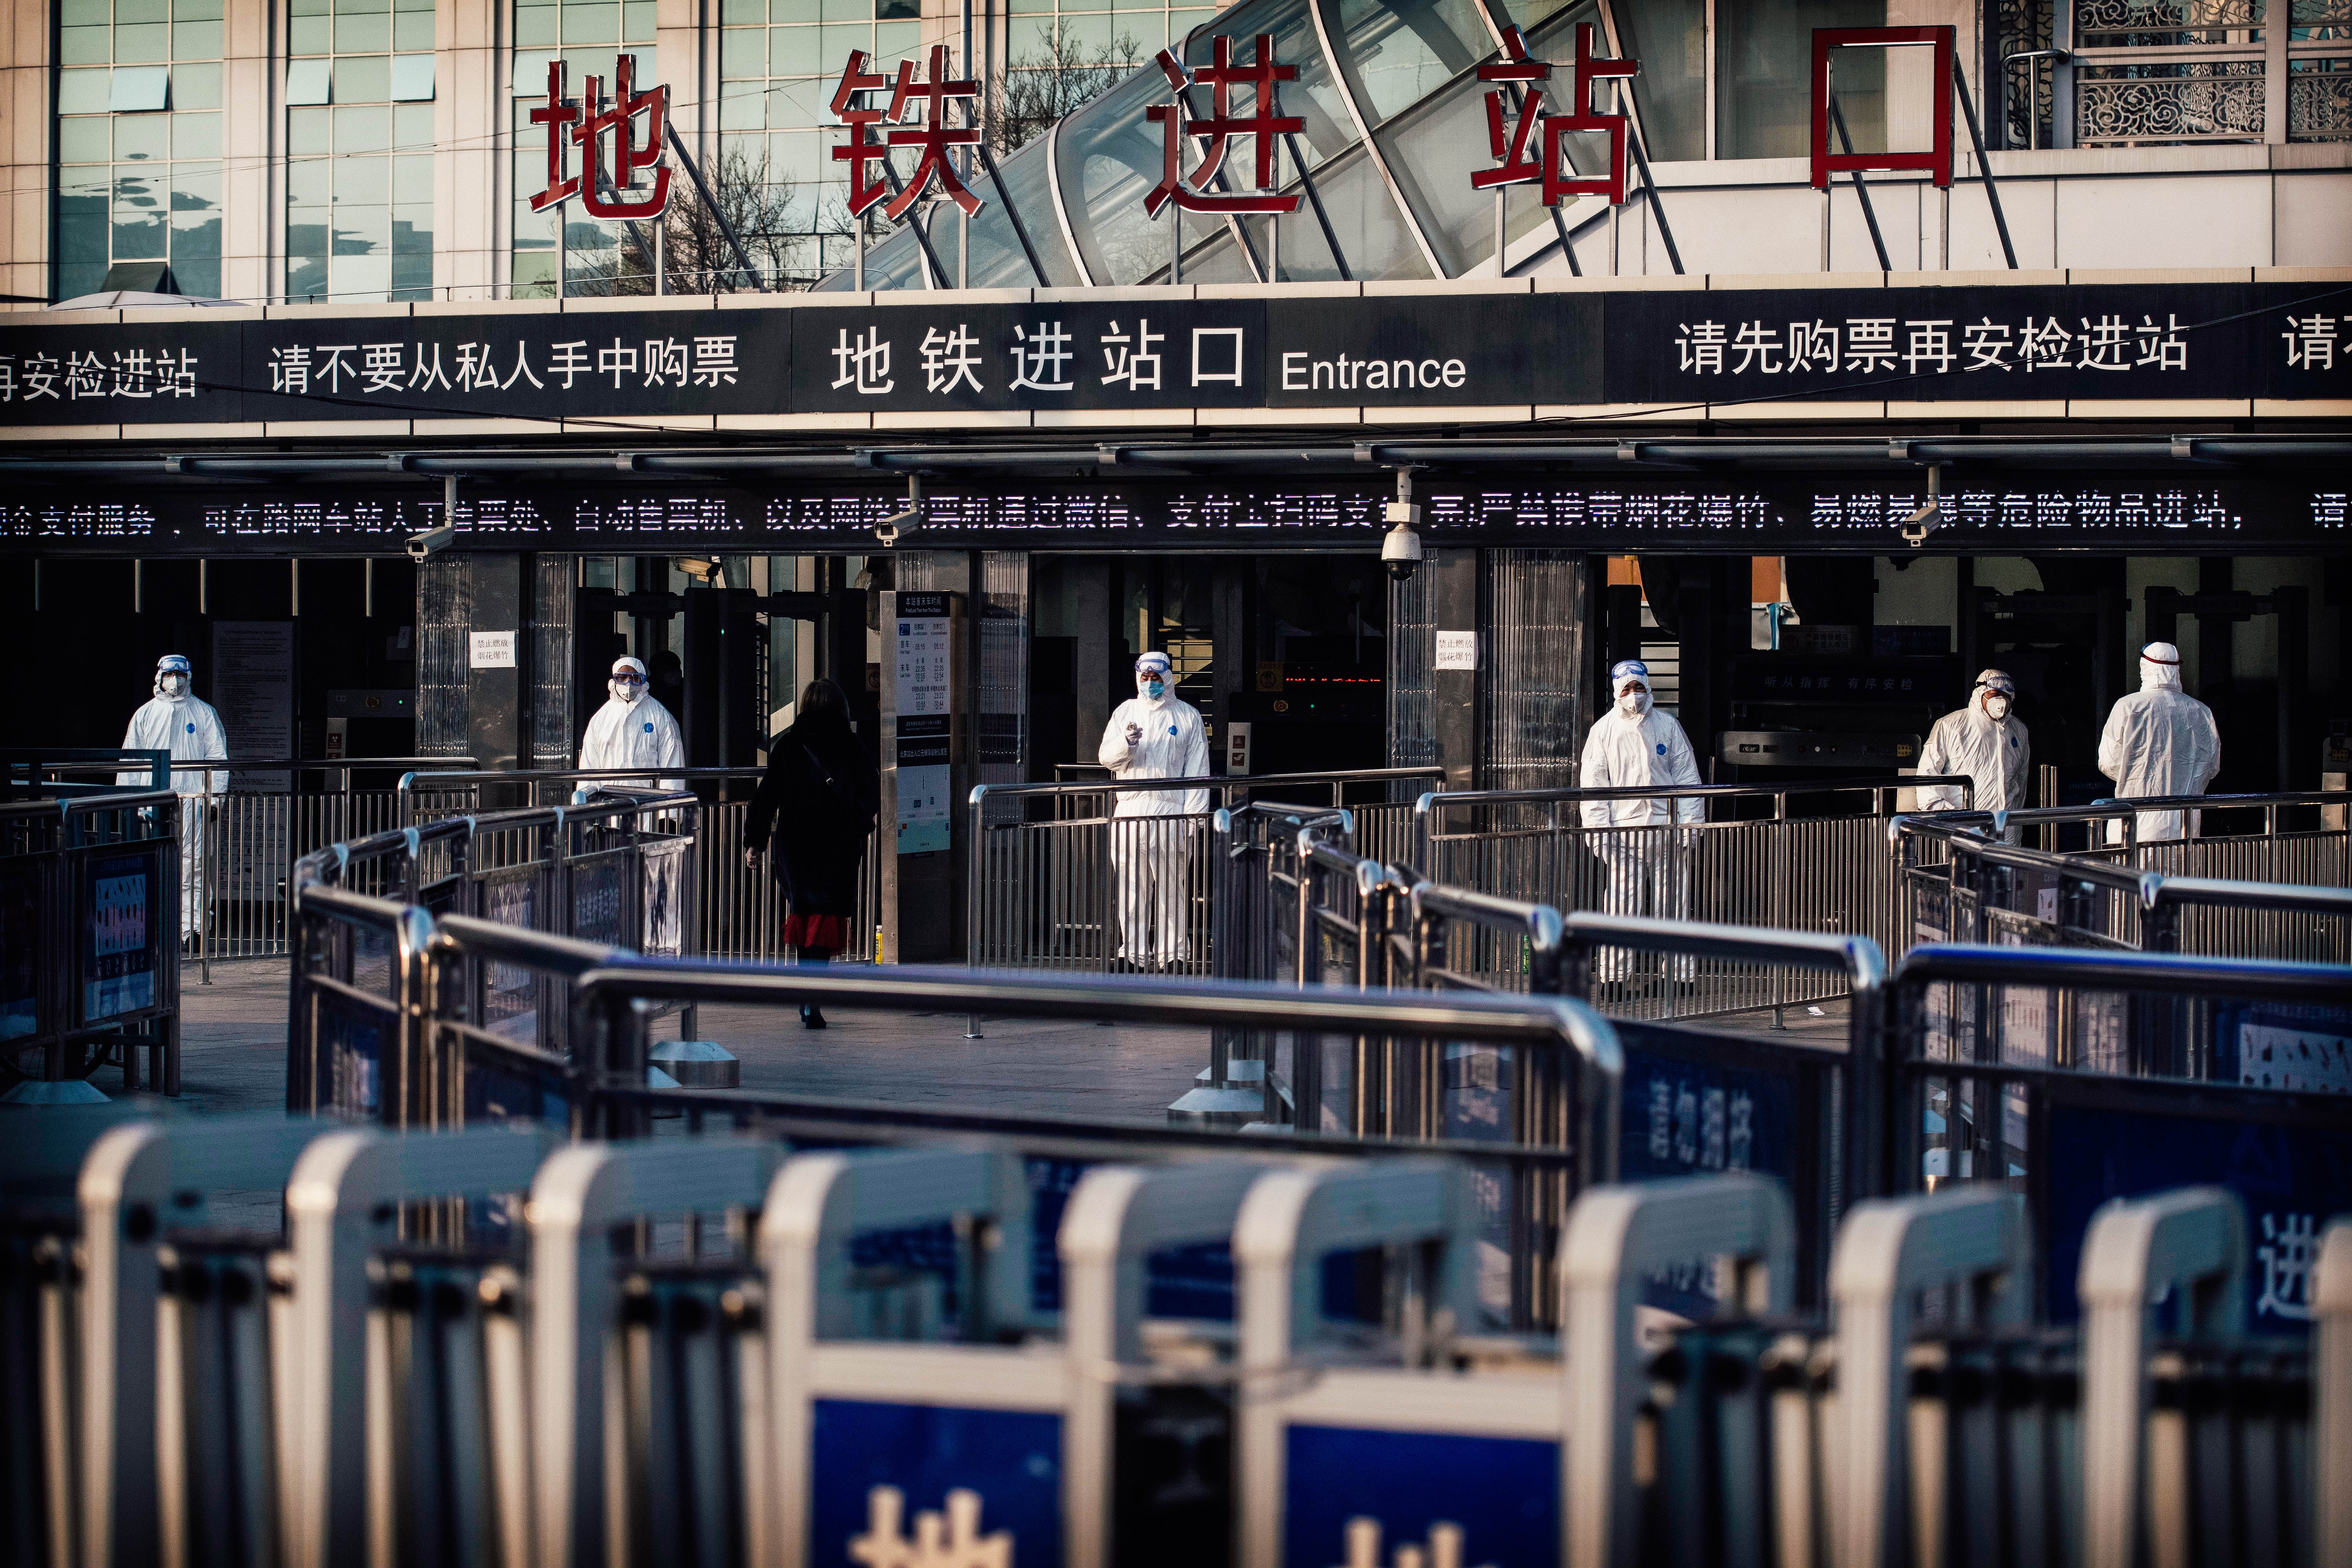 Workers in protective suits stand in a train station.